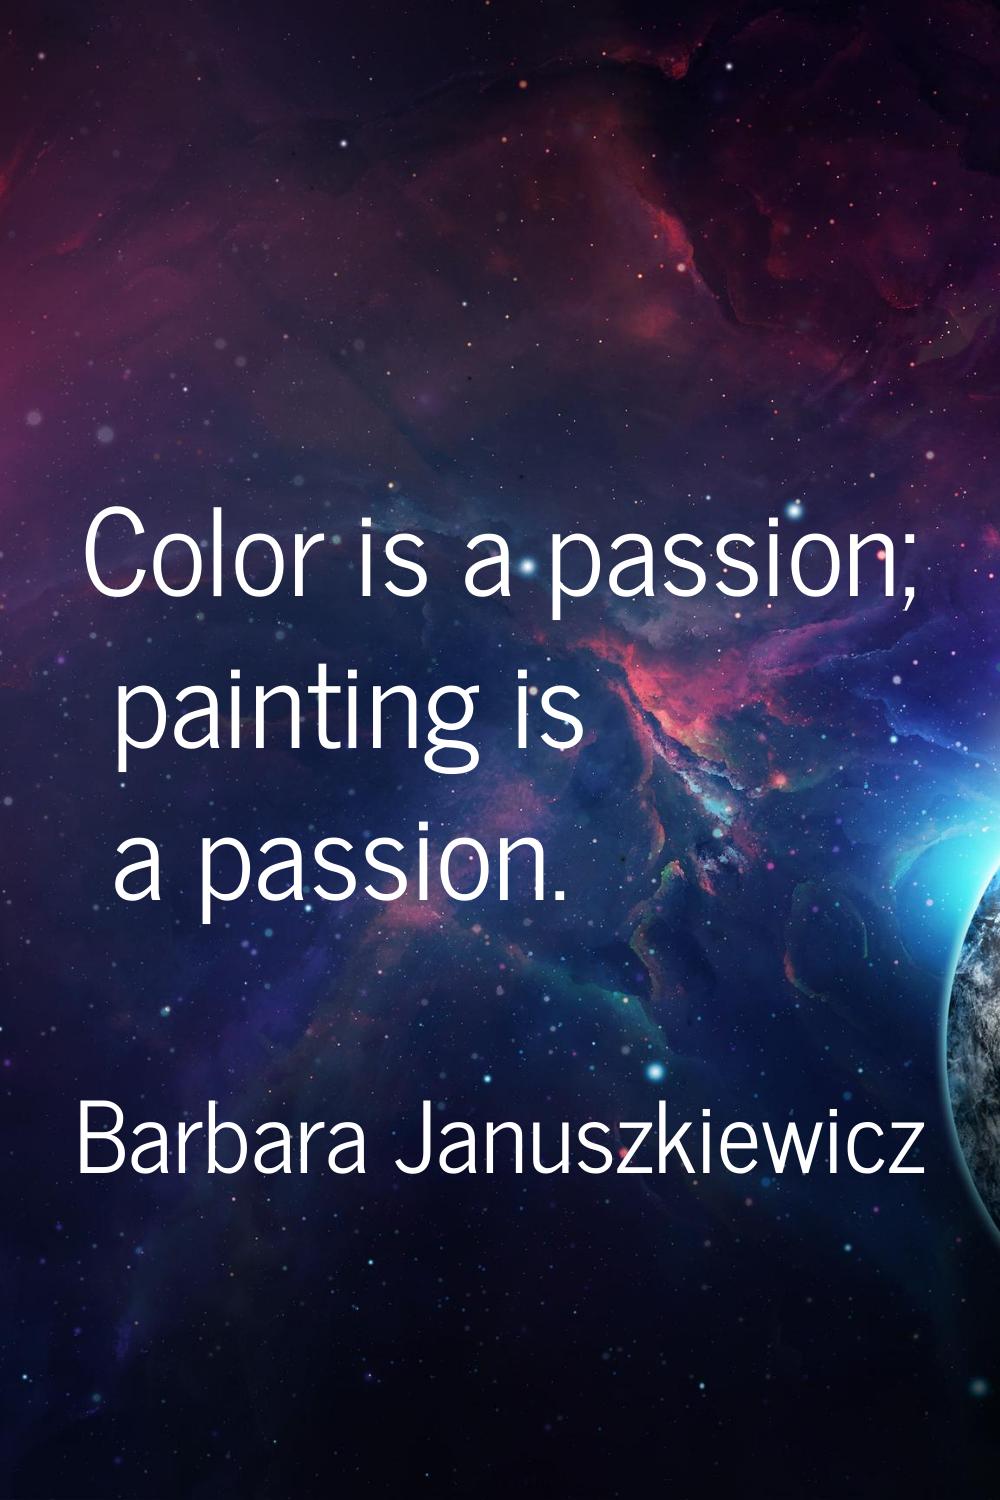 Color is a passion; painting is a passion.